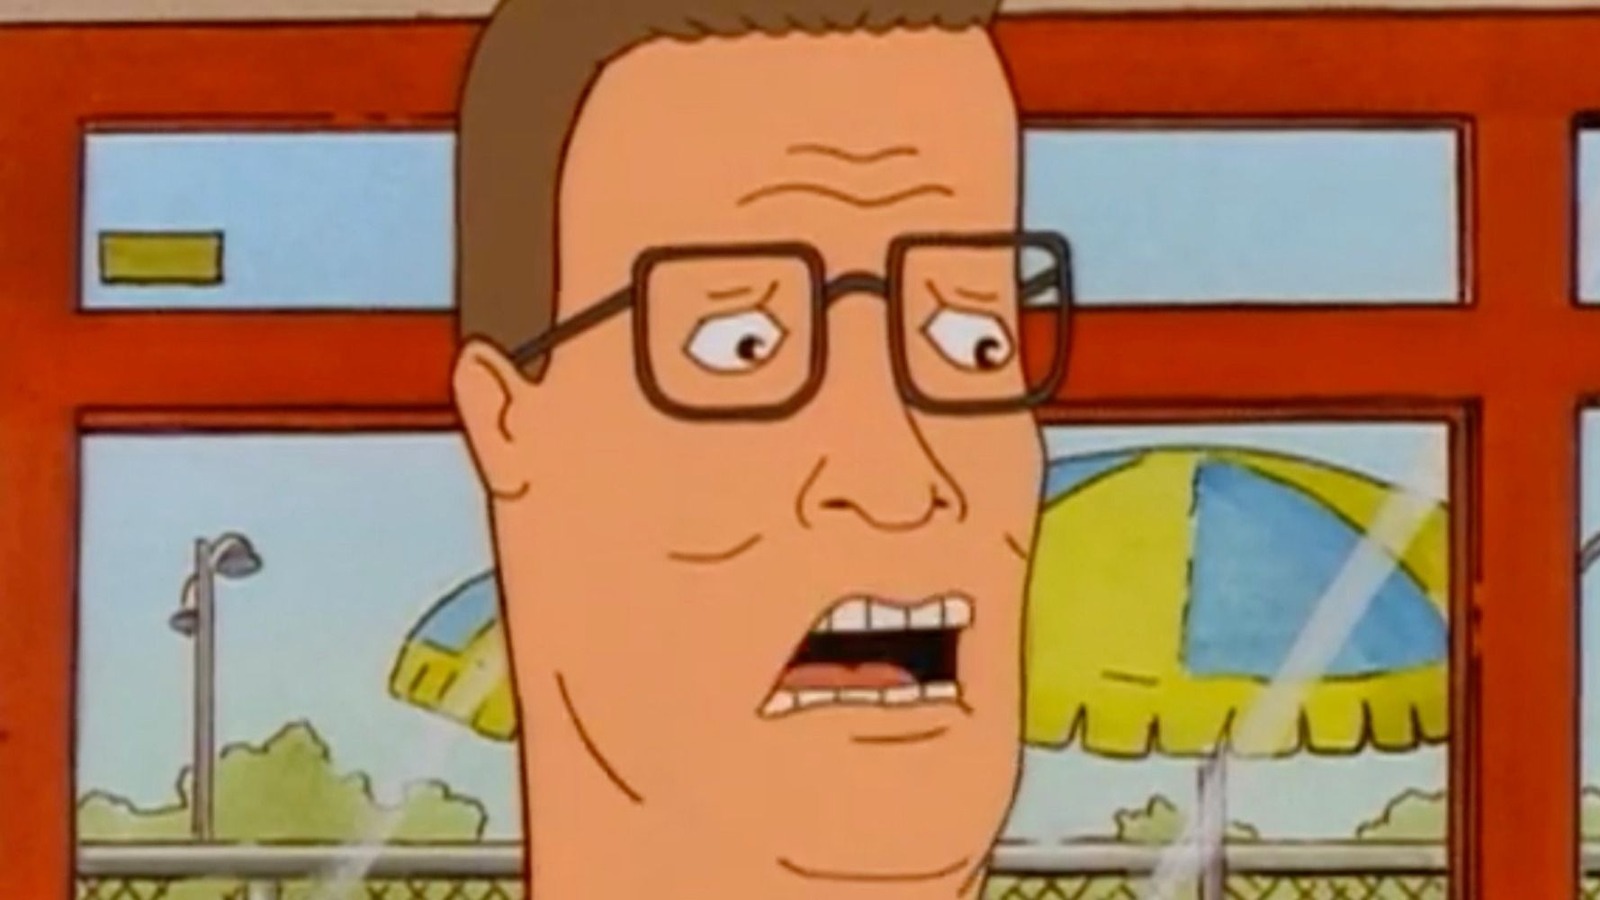 King of the Hill: Essential Episodes